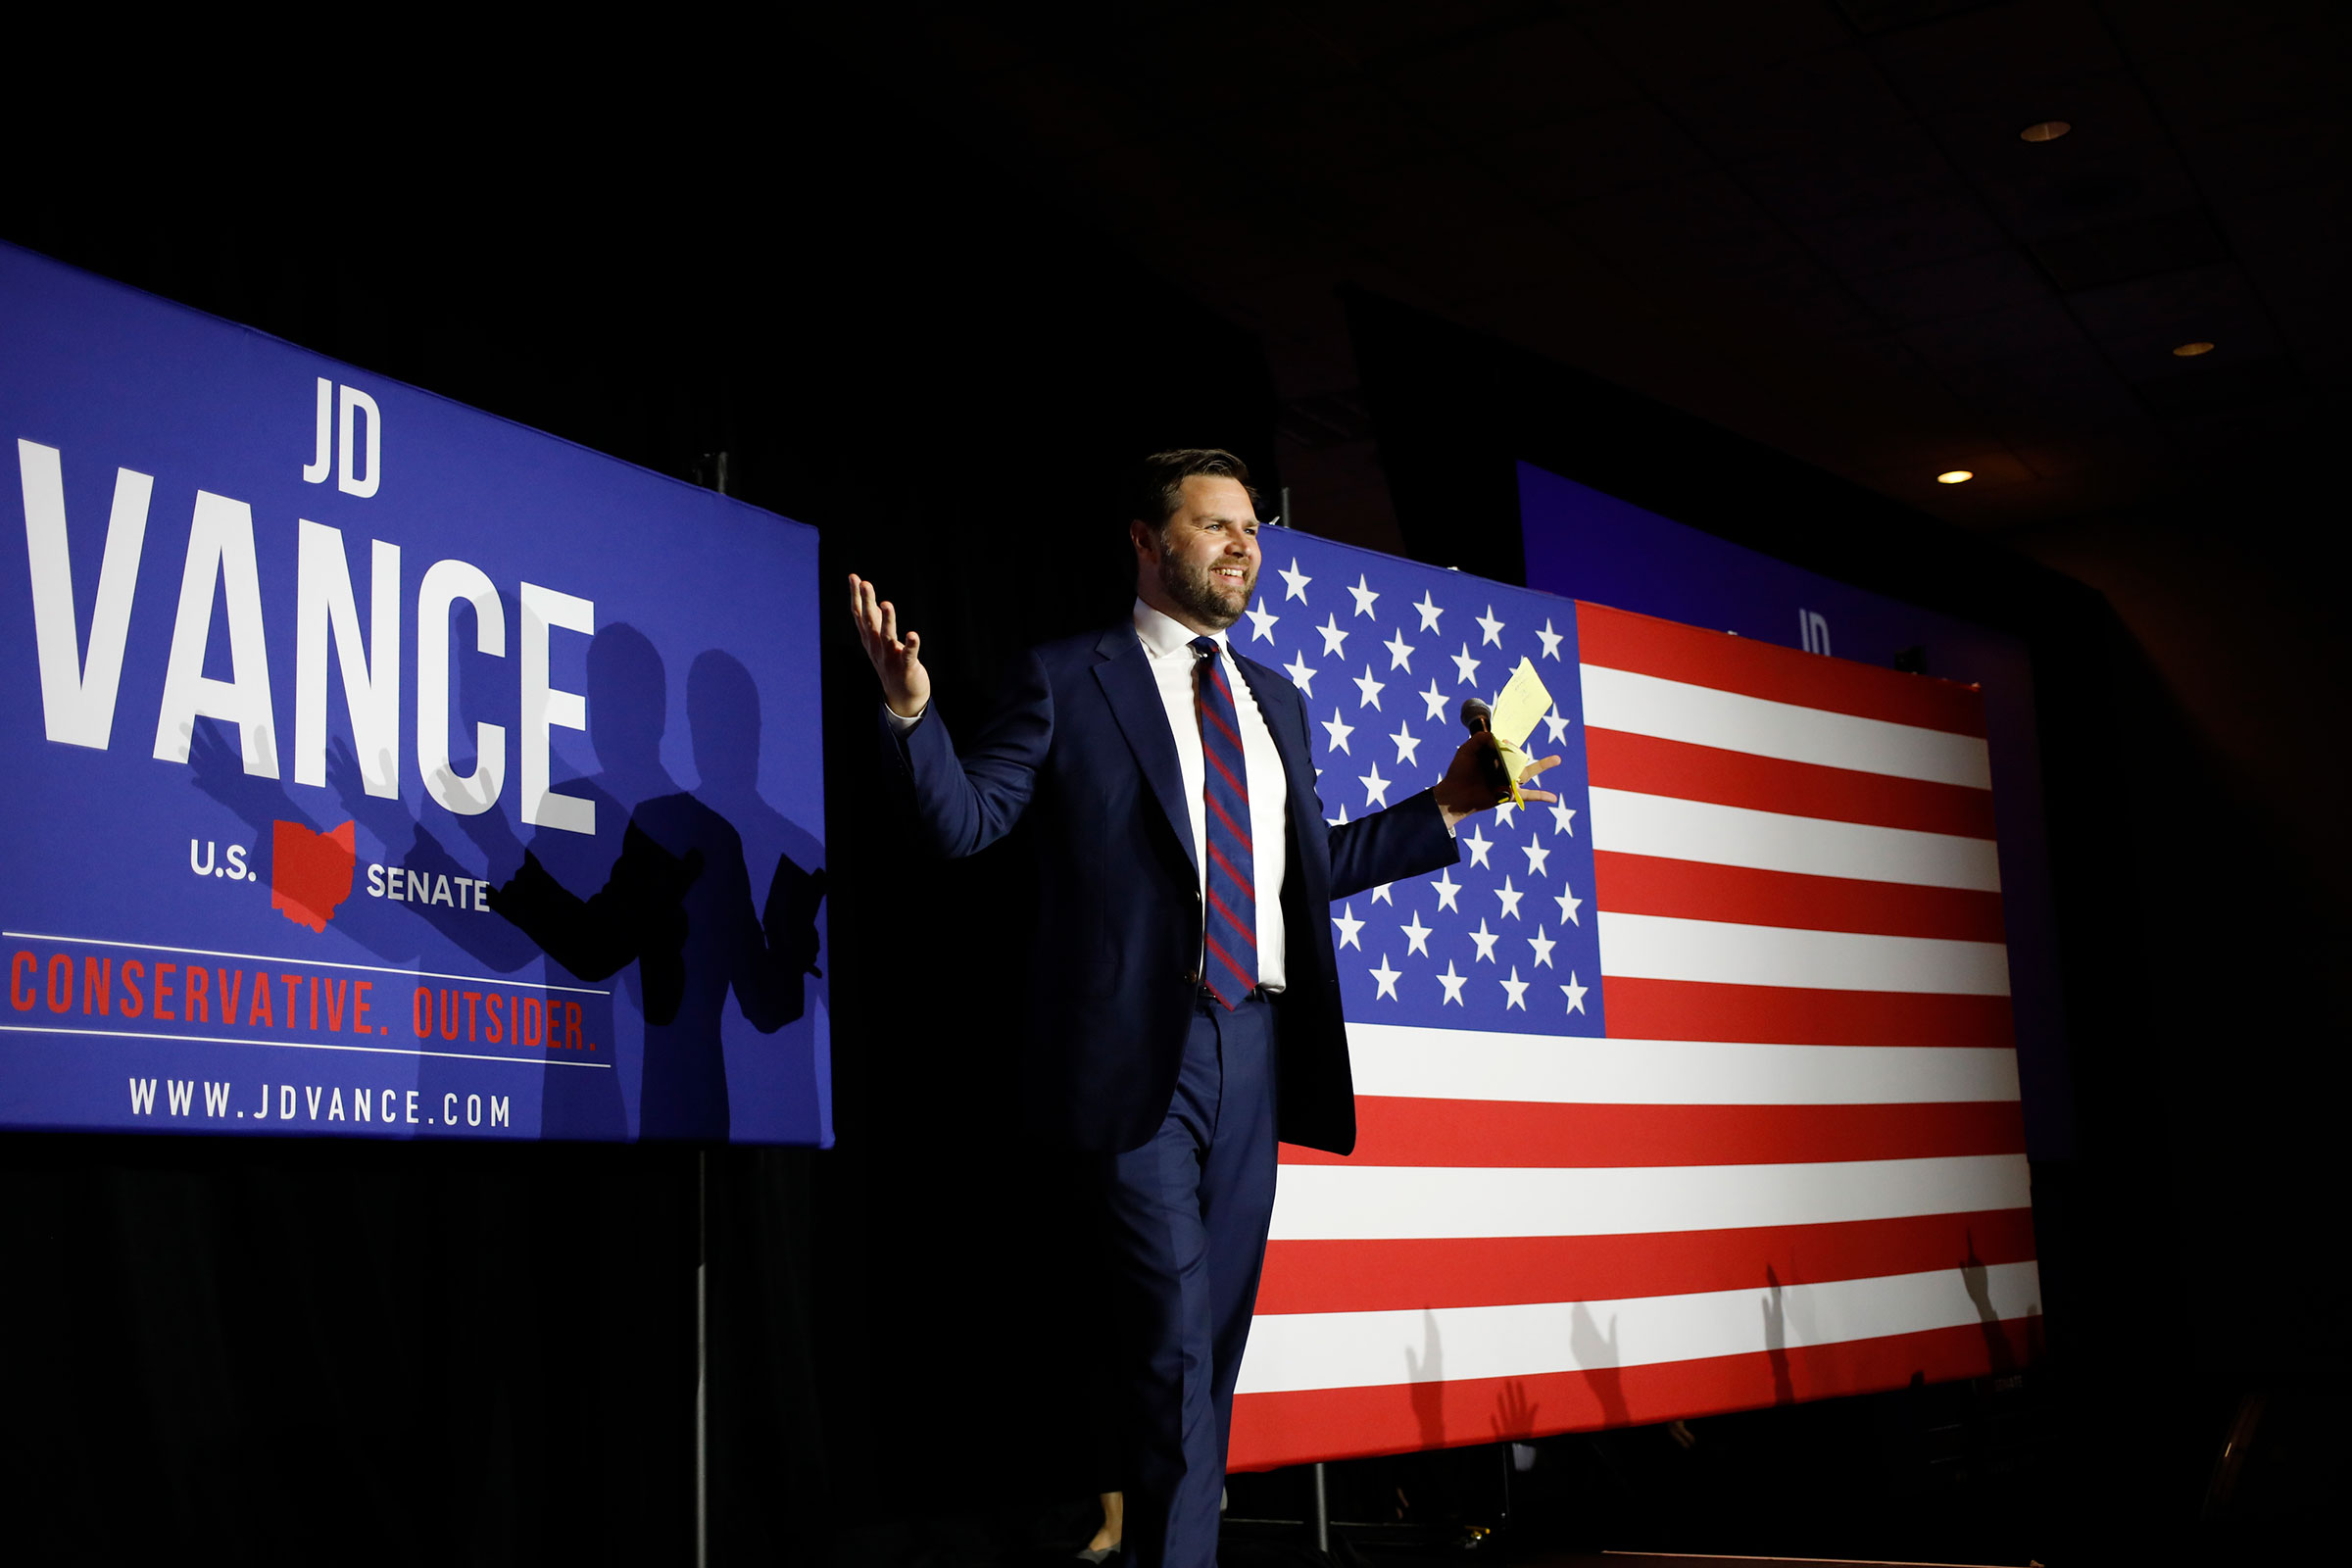 JD Vance on stage during a primary election night event in Cincinnati, Ohio on May 3, 2022. (Luke Sharrett—Bloomberg/Getty Images)